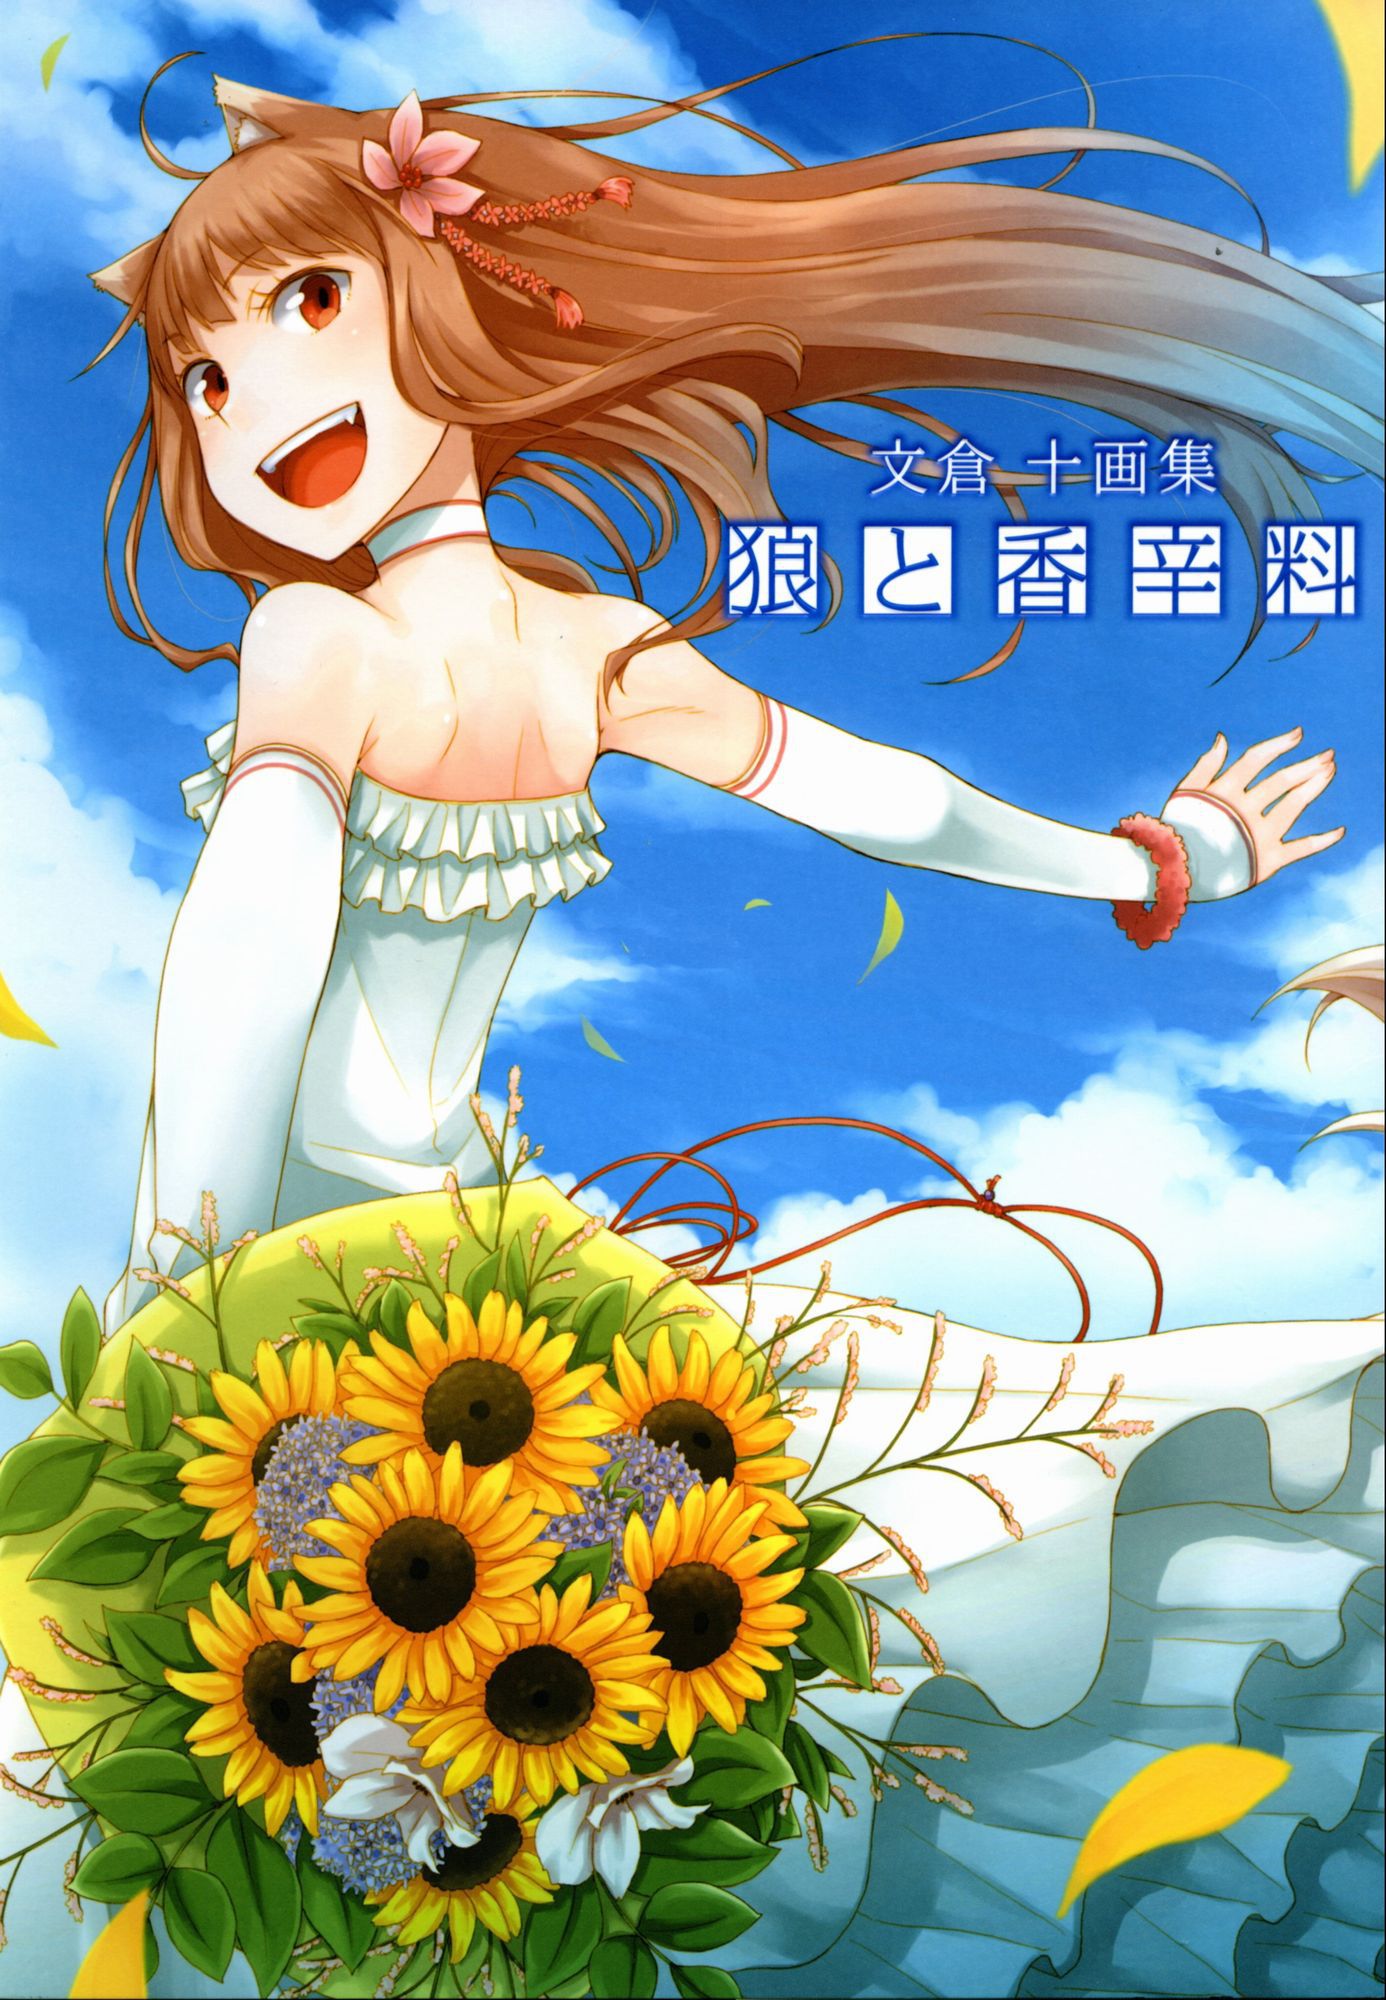 [Secondary, ZIP] summer 2: girl with a sunflower or image summary 39